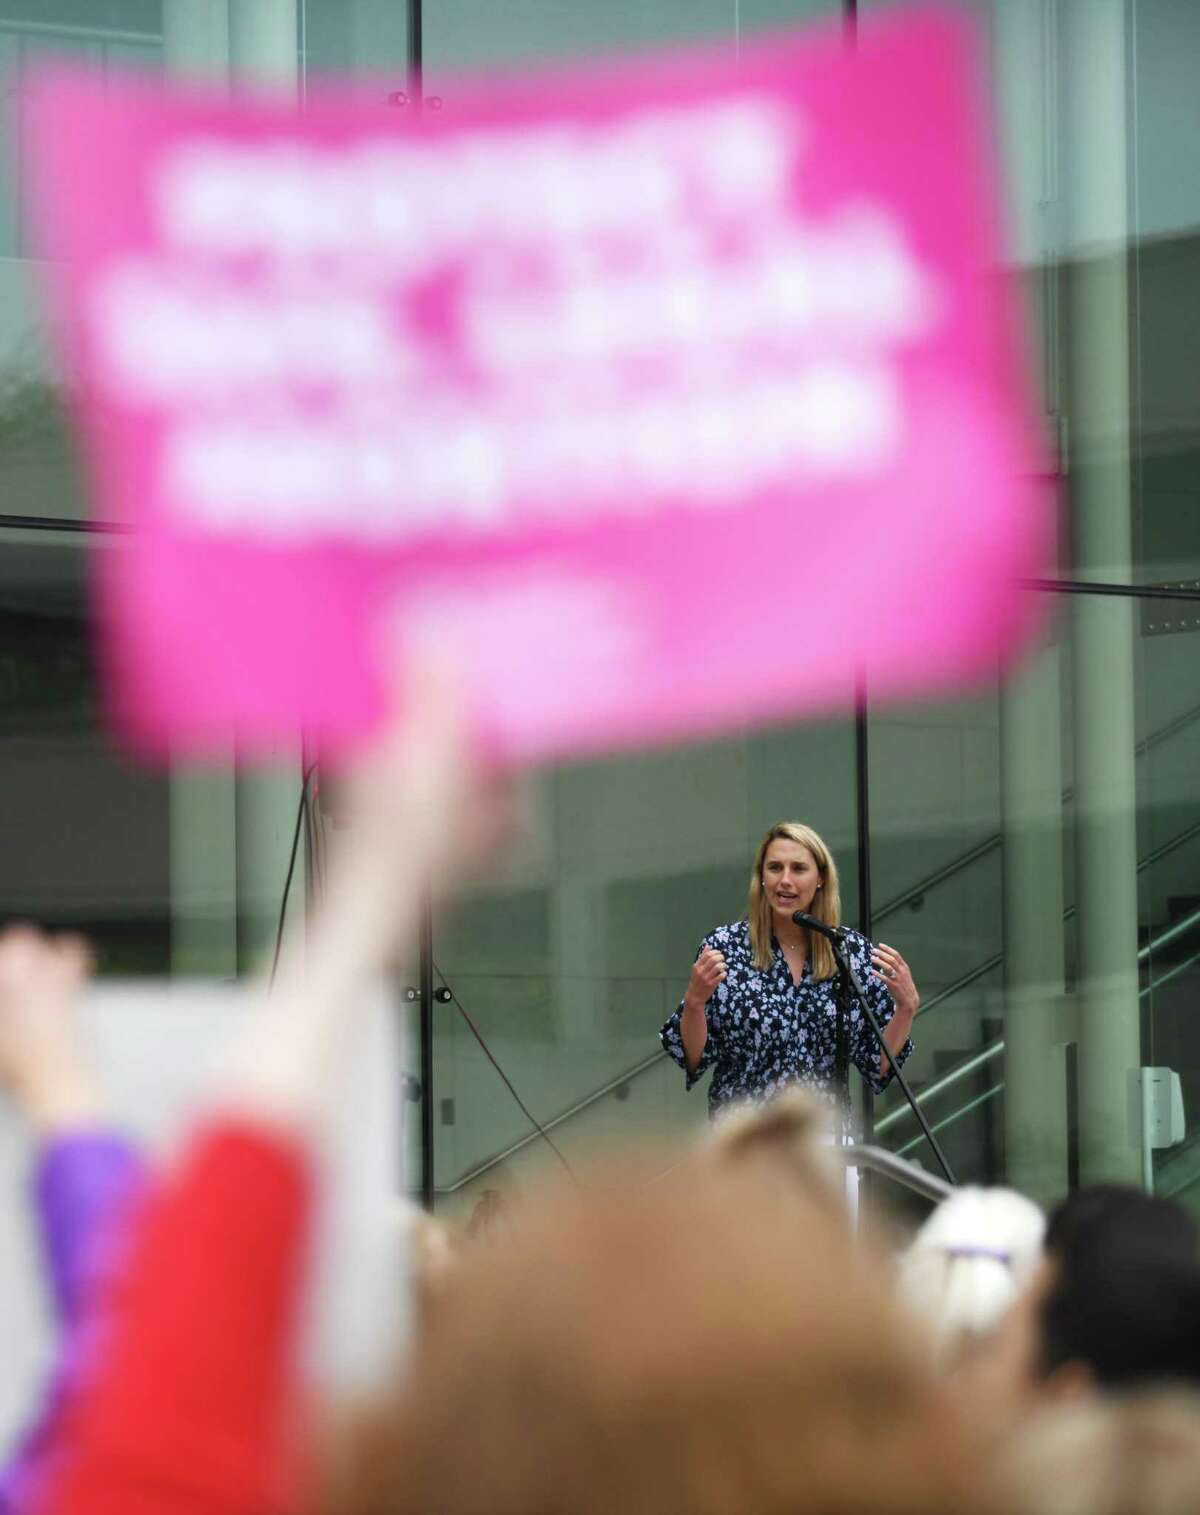 Stamford Mayor Caroline Simmons speaks during the rally Sunday. A collection of activist groups, including Planned Parenthood Federation of America, Pink Wave Action, Women's March, Ultraviolet, and MoveOn, were joined by Lt. Gov. Susan Bysiewicz, Attorney Gen. William Tong, and other local leaders to rally for abortion rights.